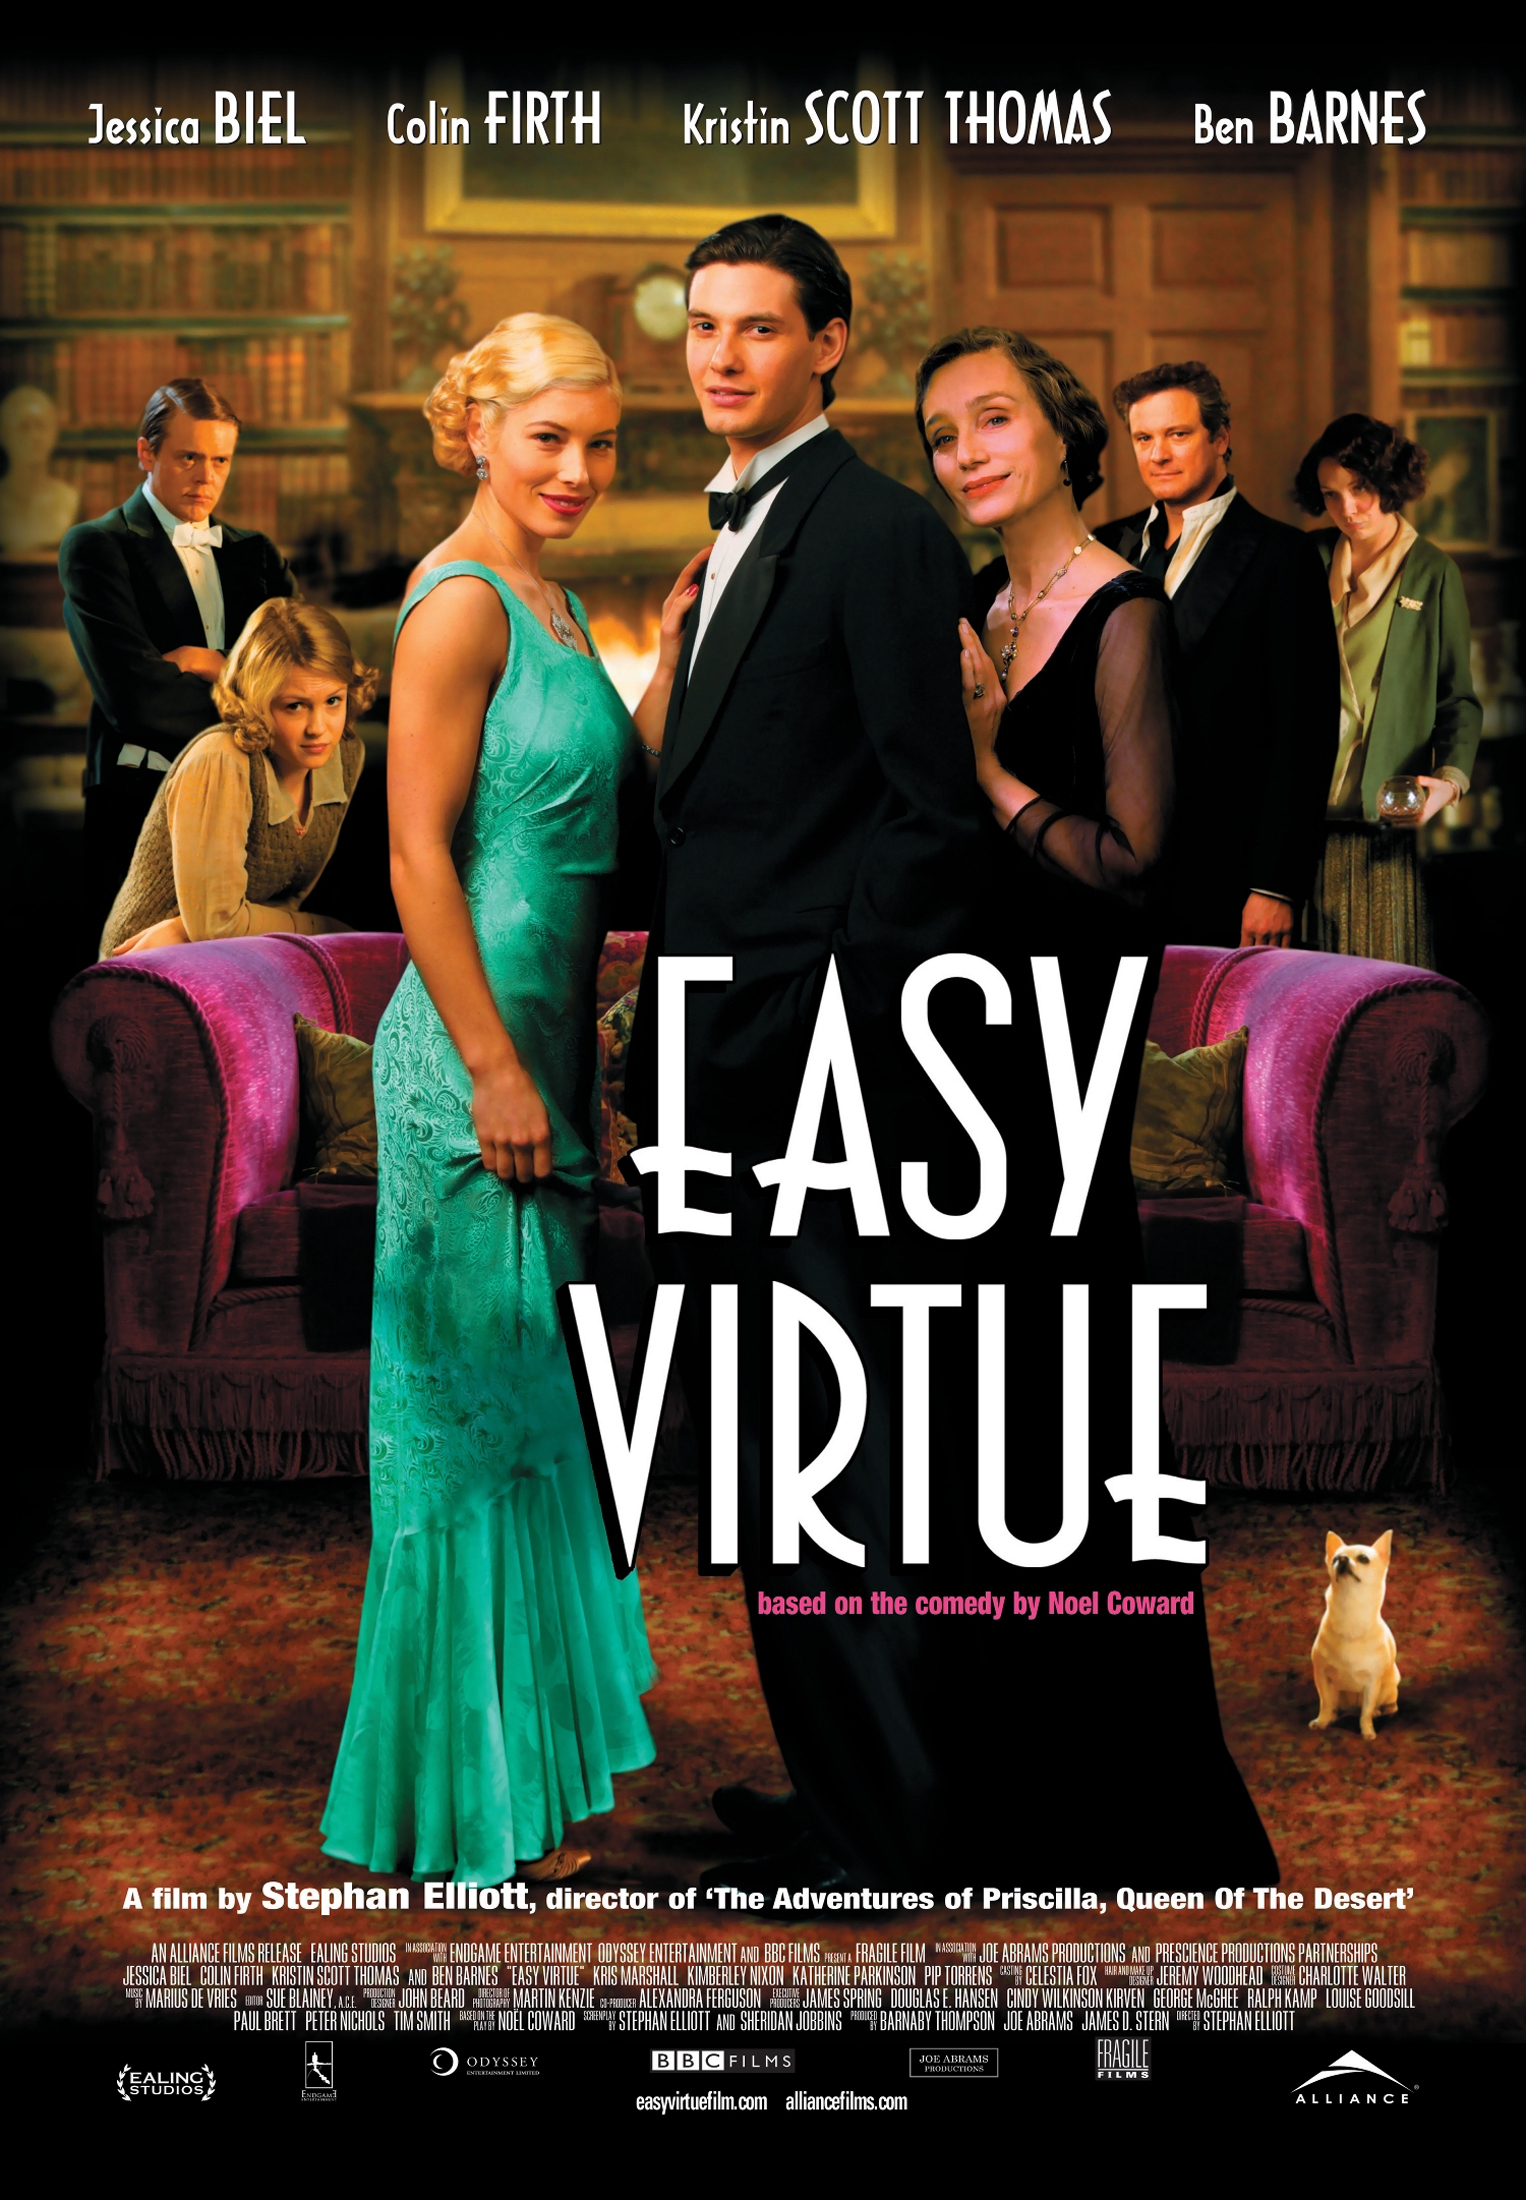 Easy Virtue (2008) Canadian poster